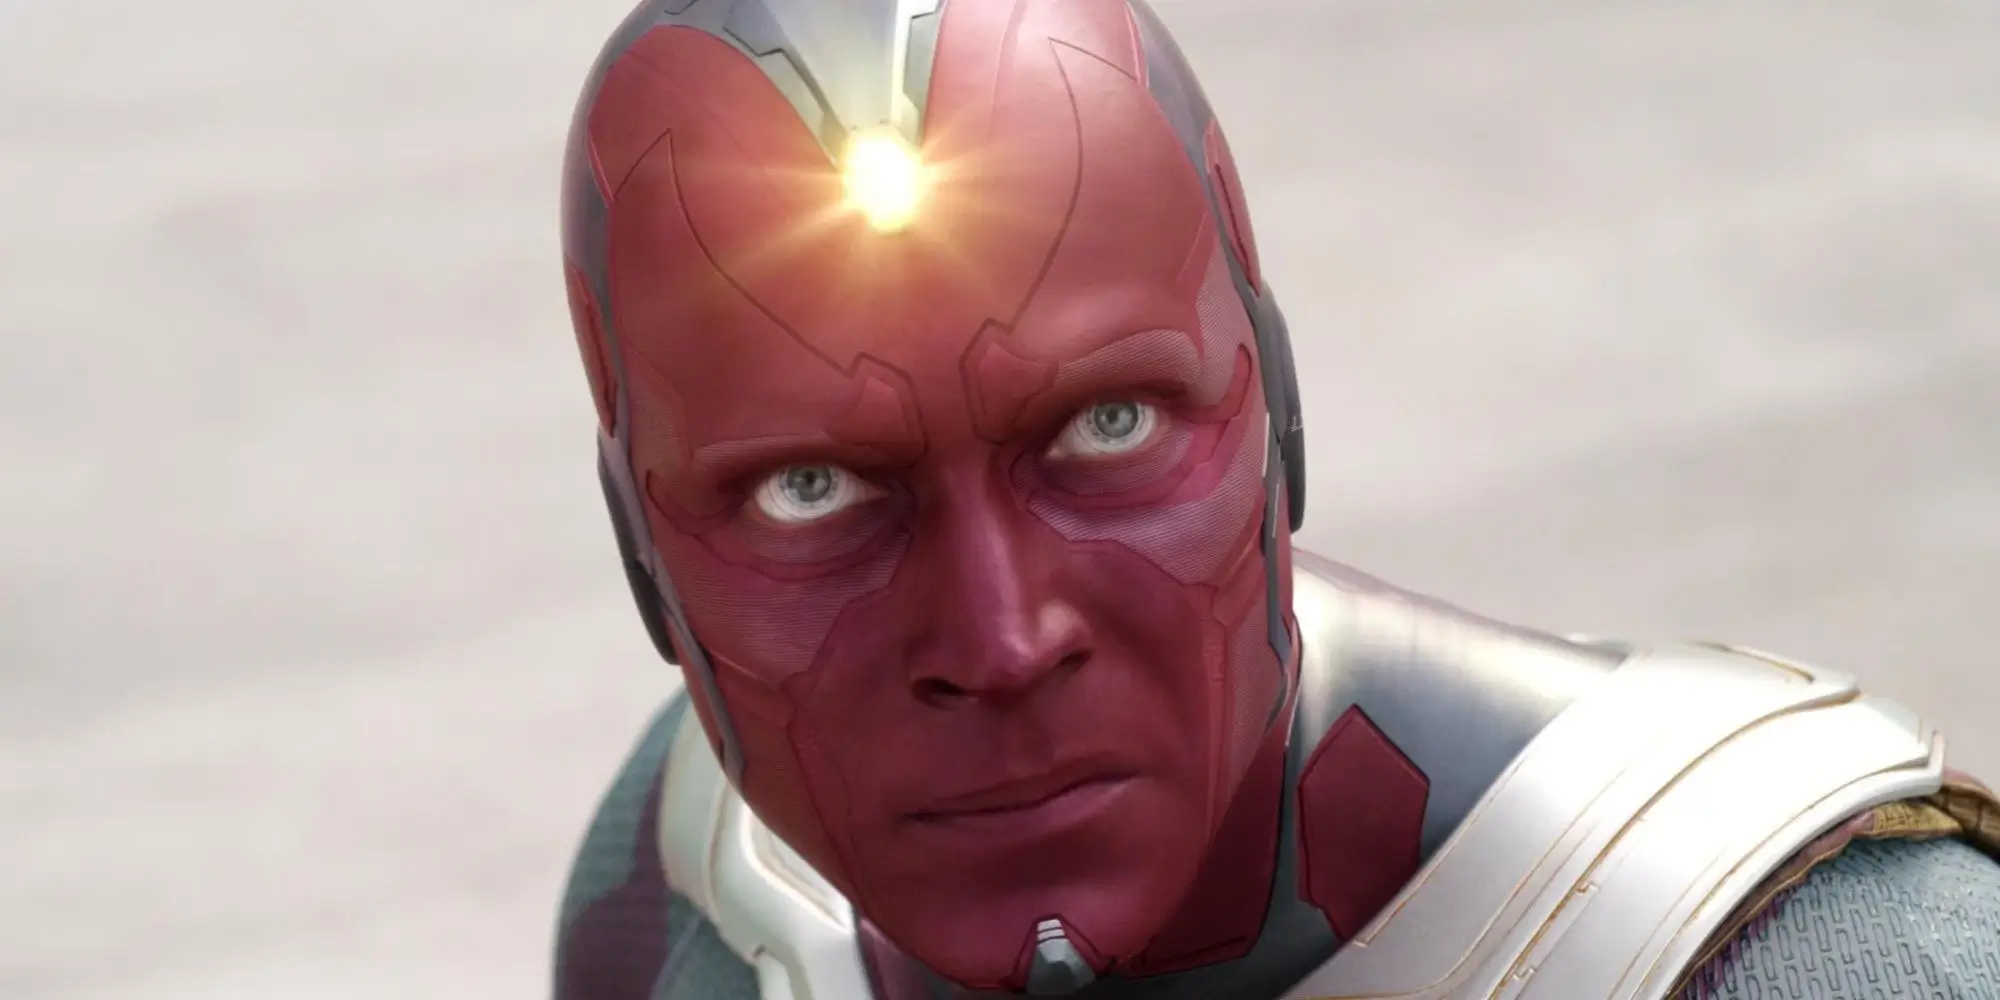 Paul Bettany's 'Vision' is Captain America's favorite